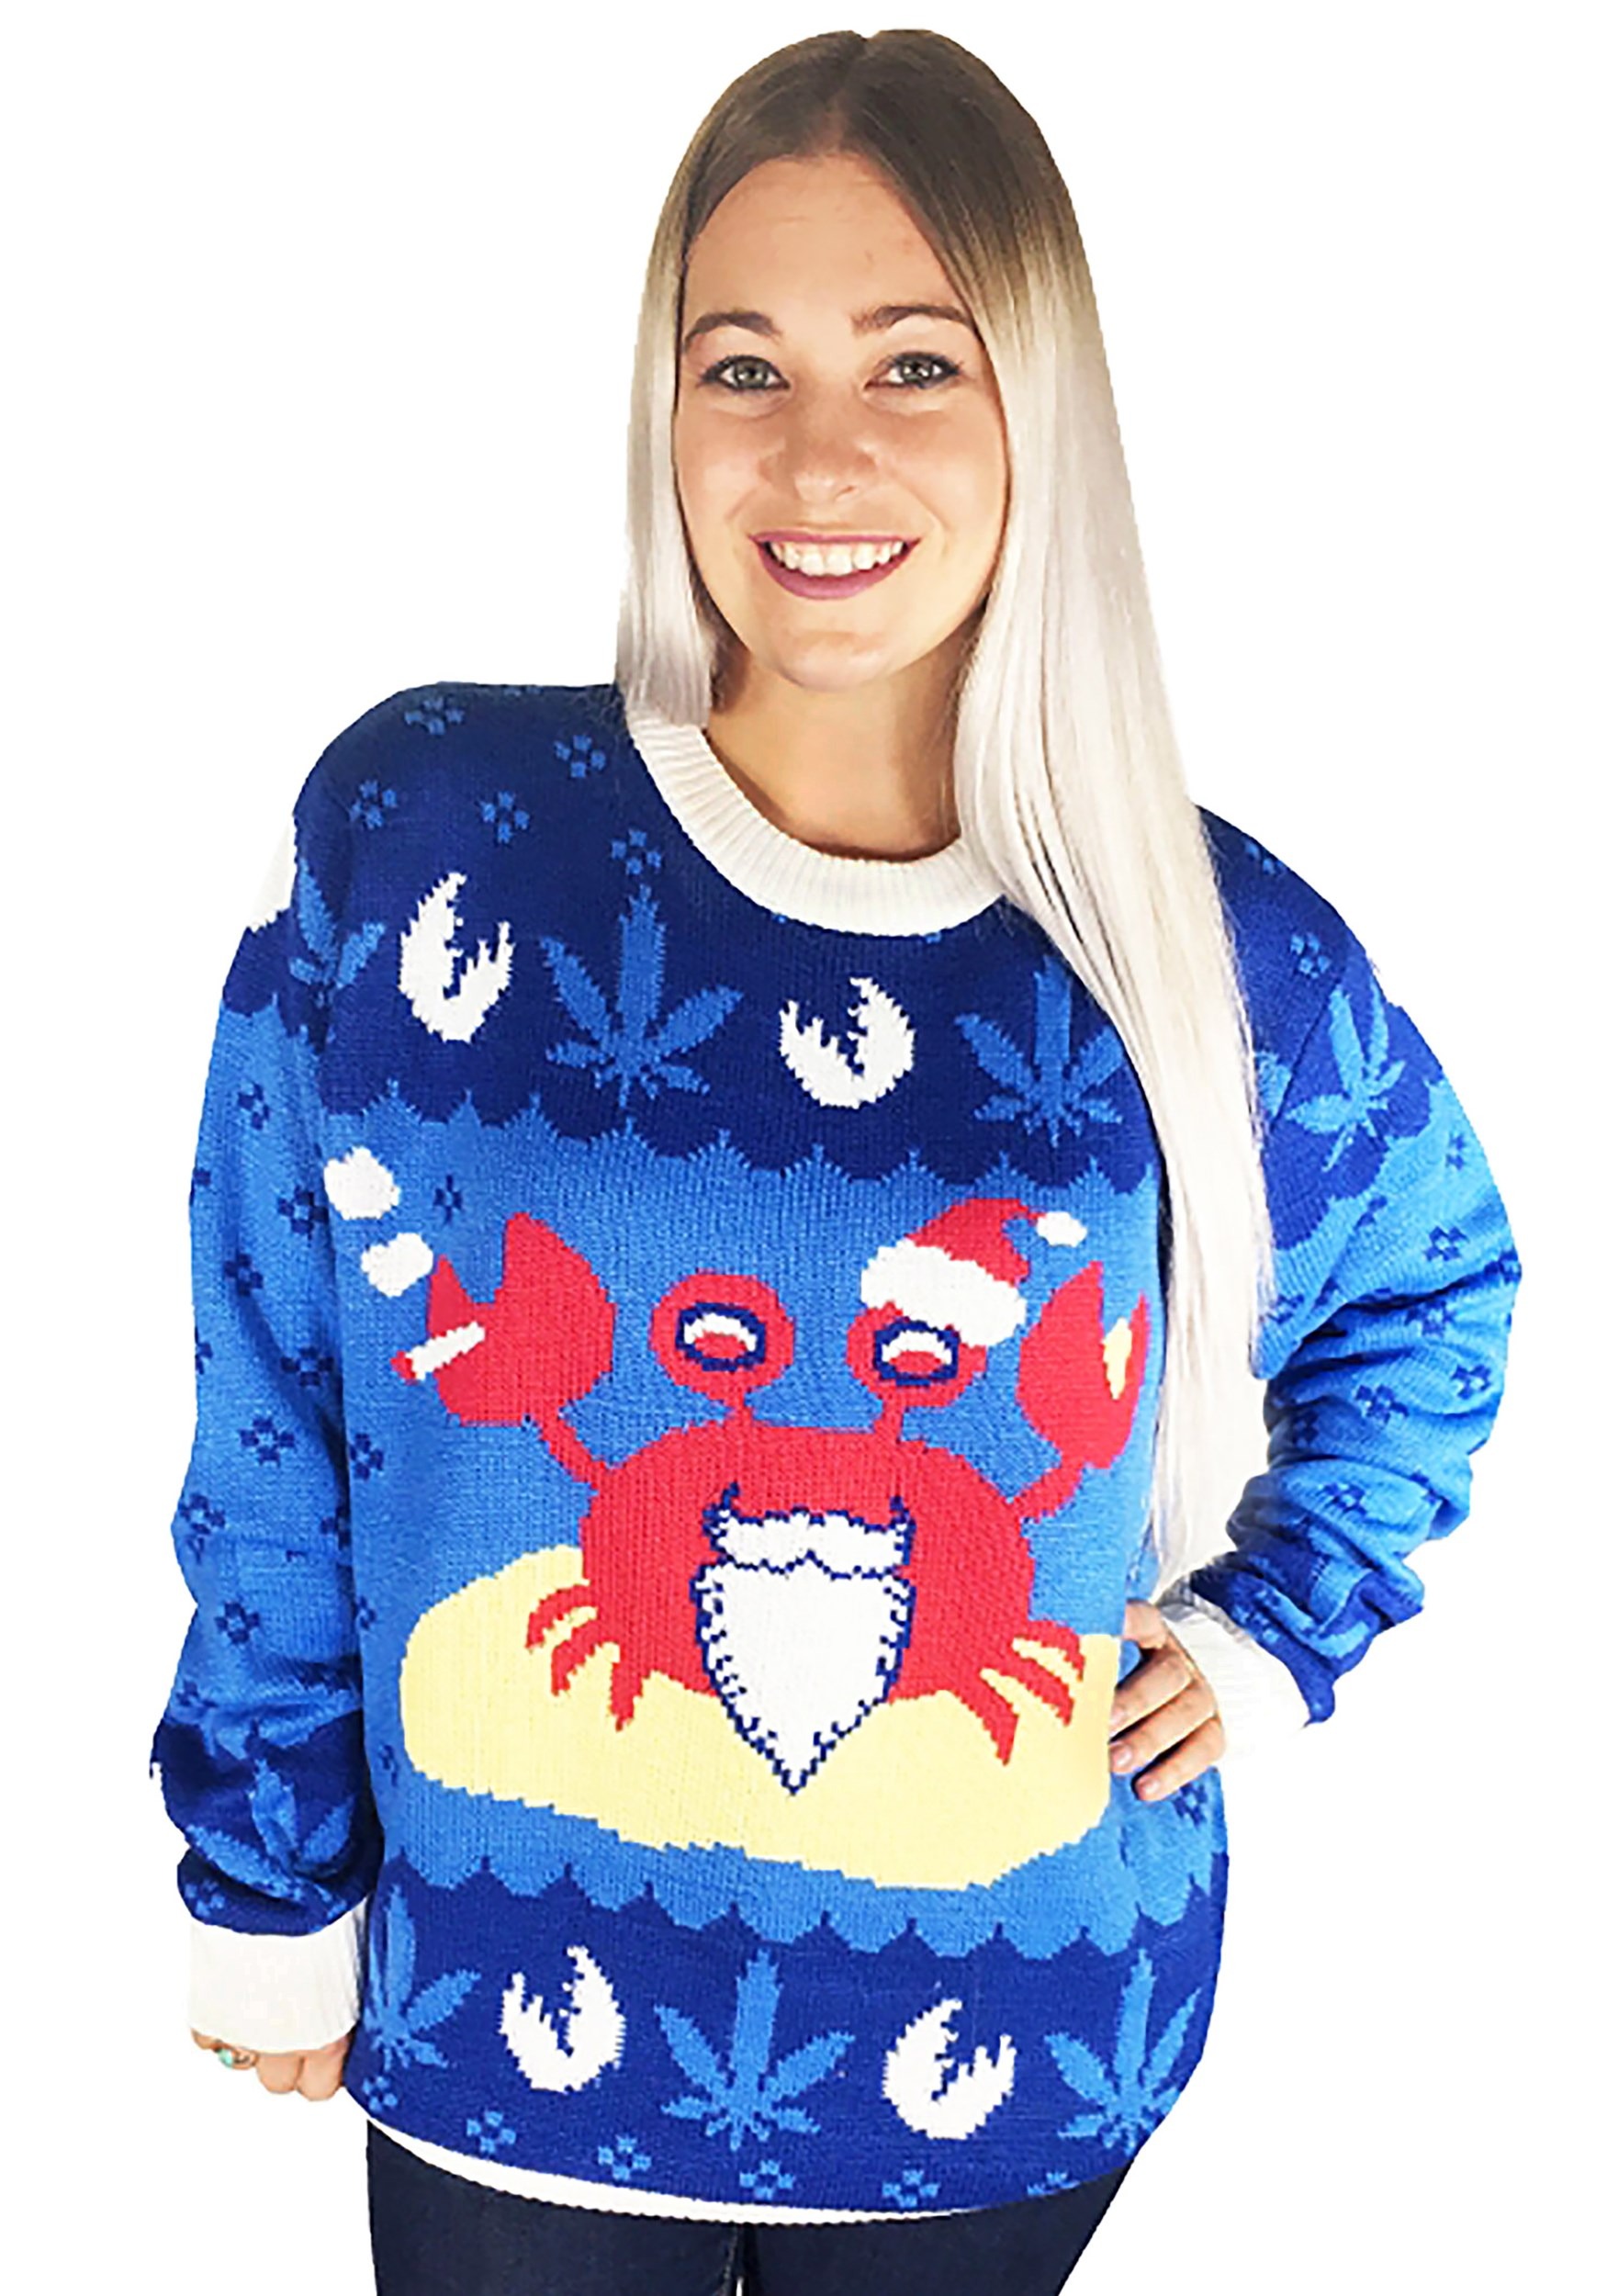 The Mistah Sandy Claws Crab Ugly Christmas Sweater